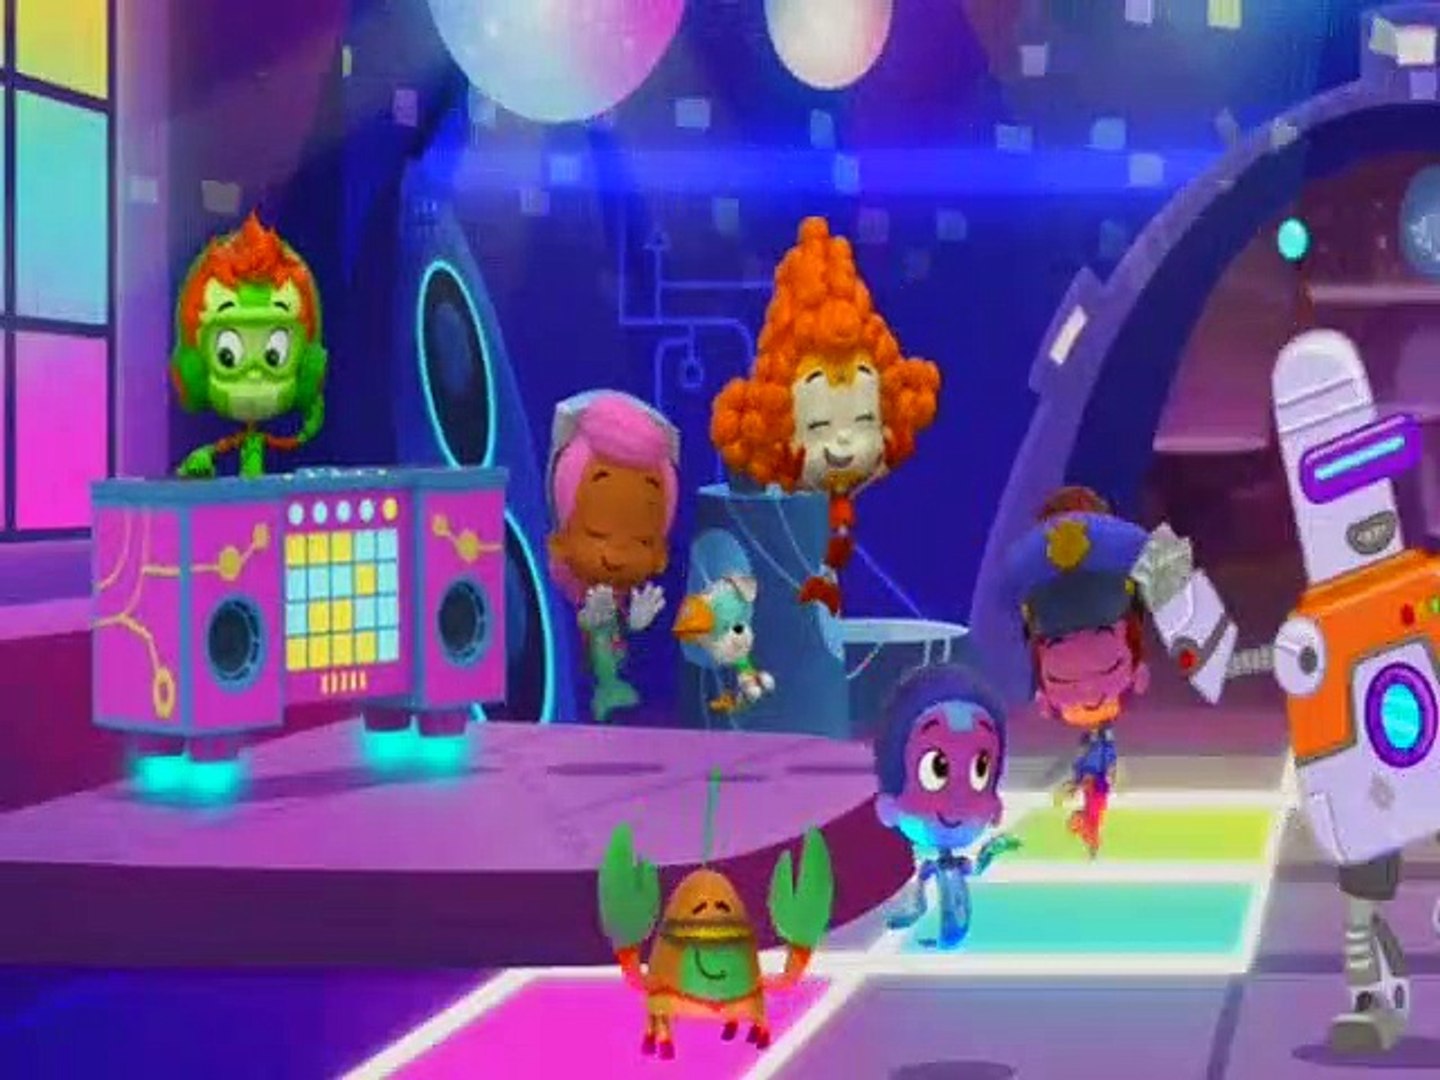 absorberende boykot hjul Bubble Guppies Robot Spot the Difference with Nonny! - Bubble Guppies -  video Dailymotion